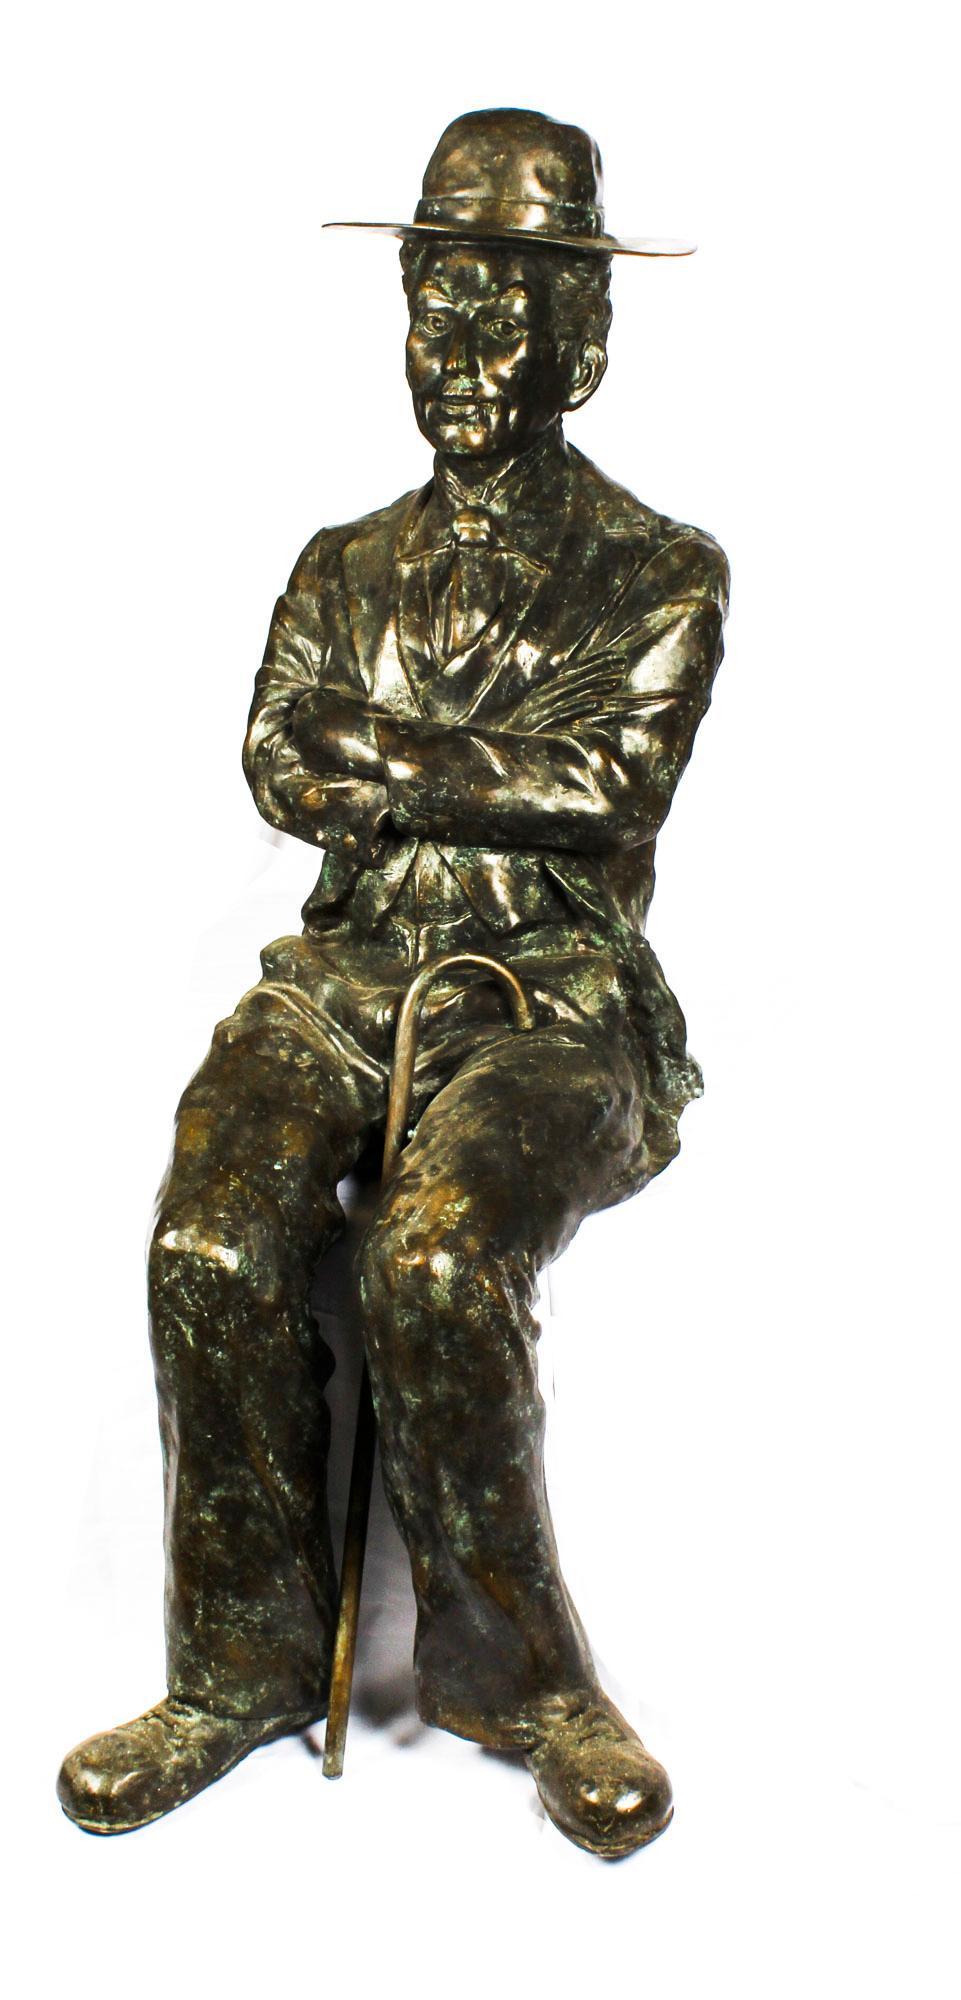 Vintage Lifesize Bronze Sculpture of Seated Charlie Chaplin 20th Century For Sale 7